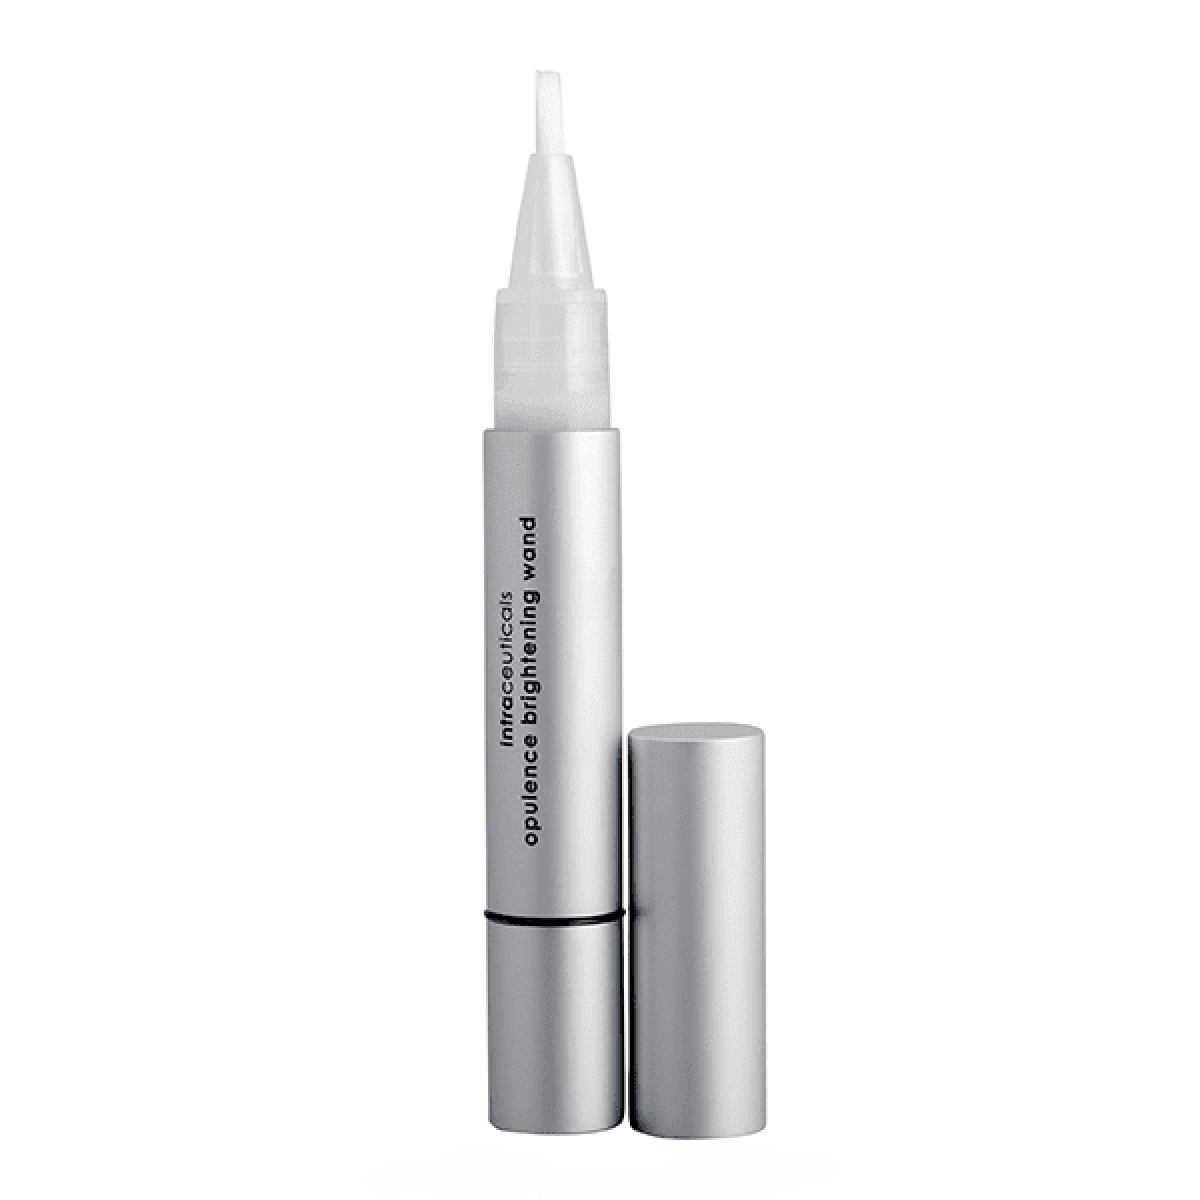 Intraceuticals - Opulence Brightening Wand_4ml